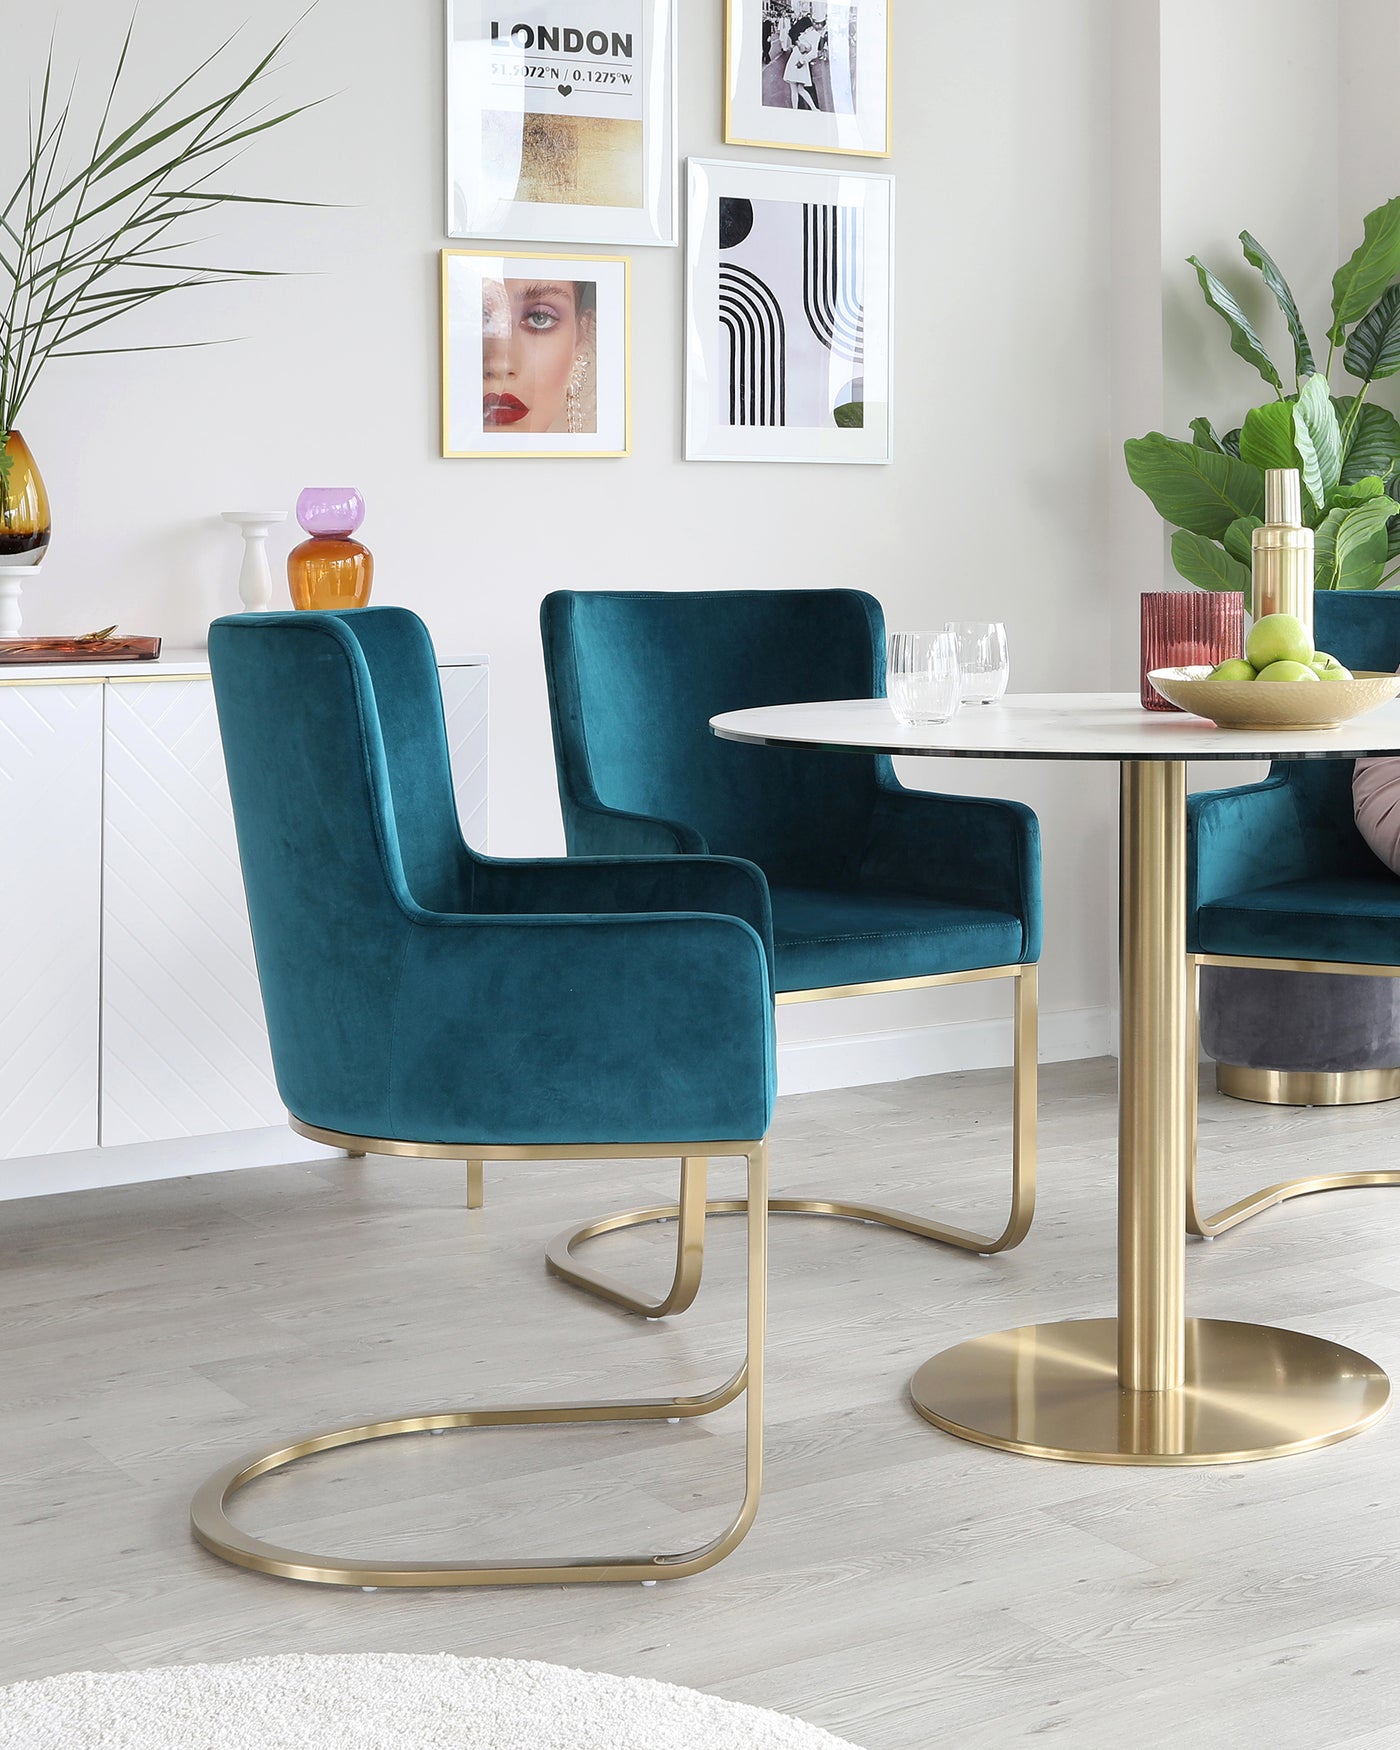 Two elegant teal velvet dining chairs with unique gold-finished metal legs, paired with a round white marble-top table with a gold-finished pedestal base.